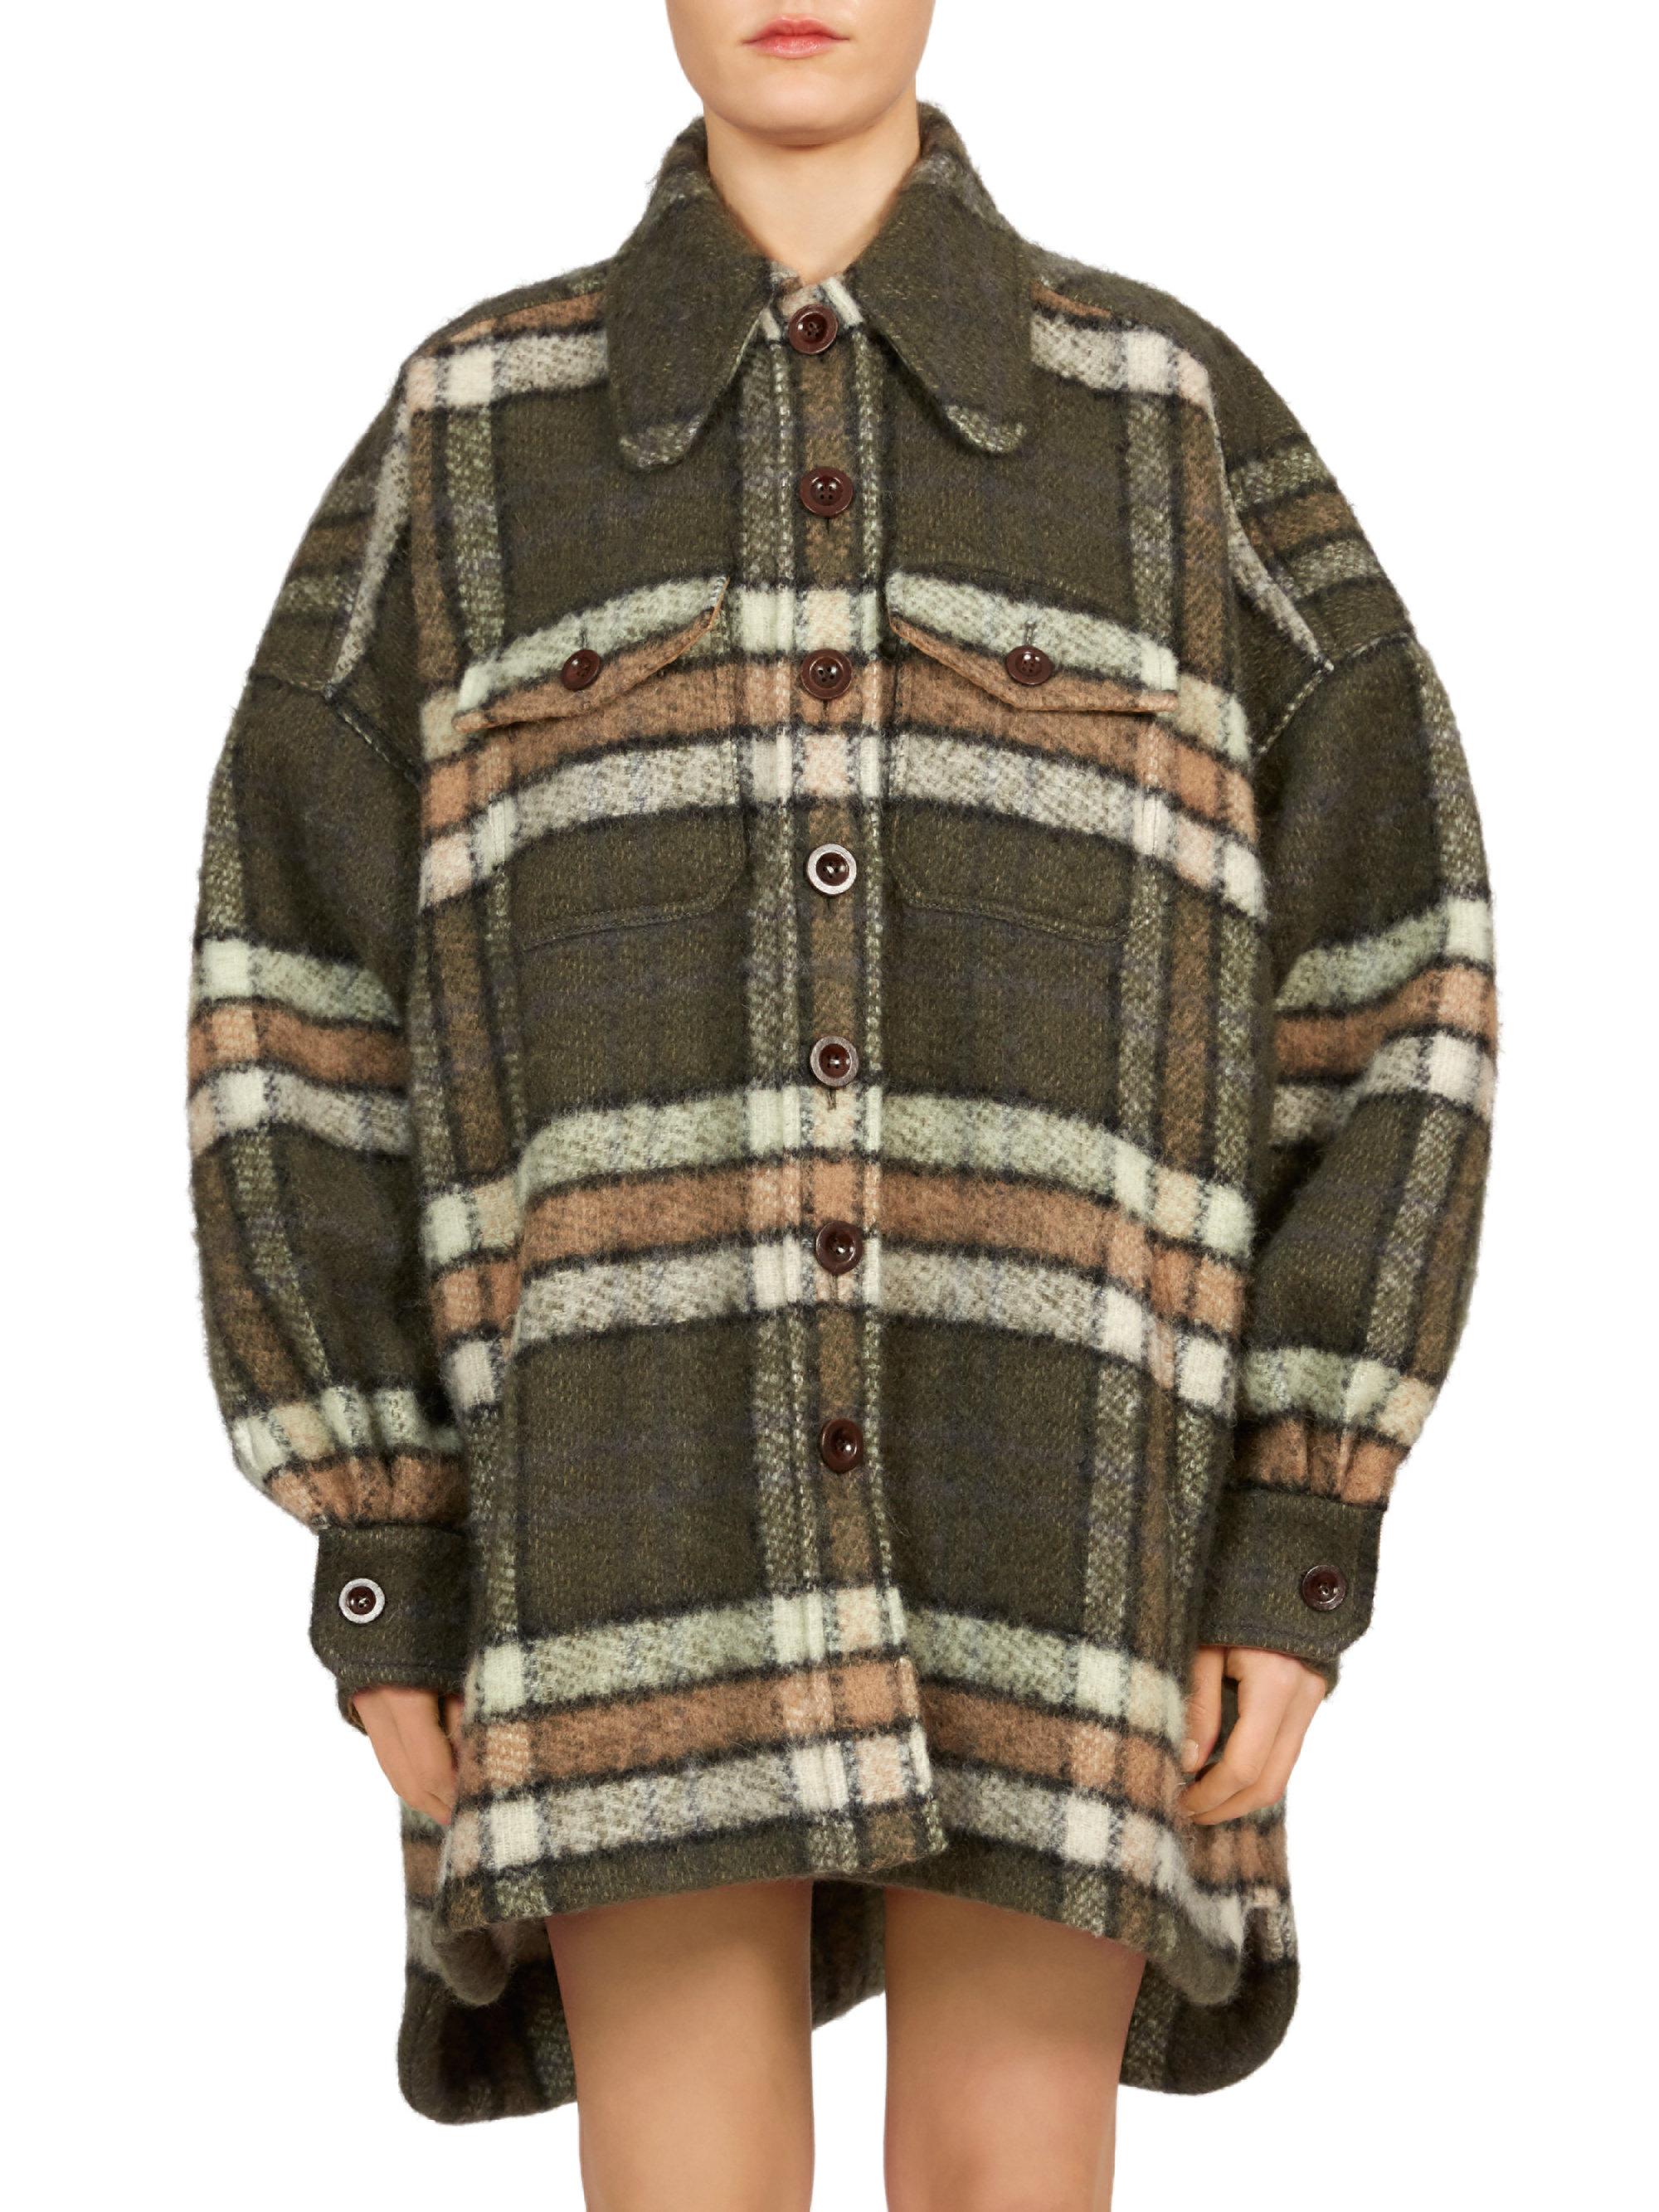 Chloé Synthetic Mohair Plaid Coat in Green - Lyst